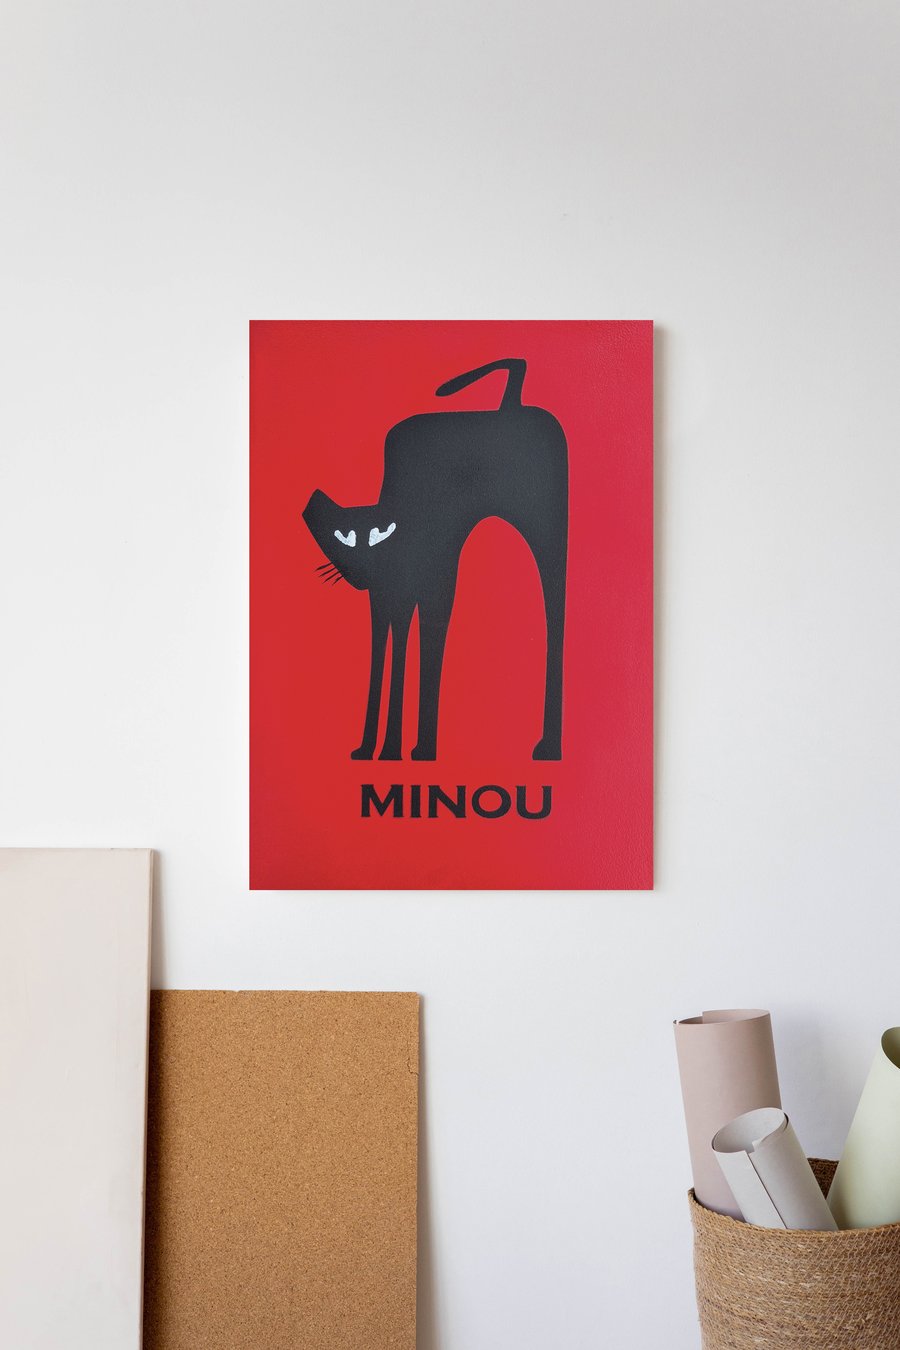 Minou or Kitty in French handmade and hand painted unique artwork